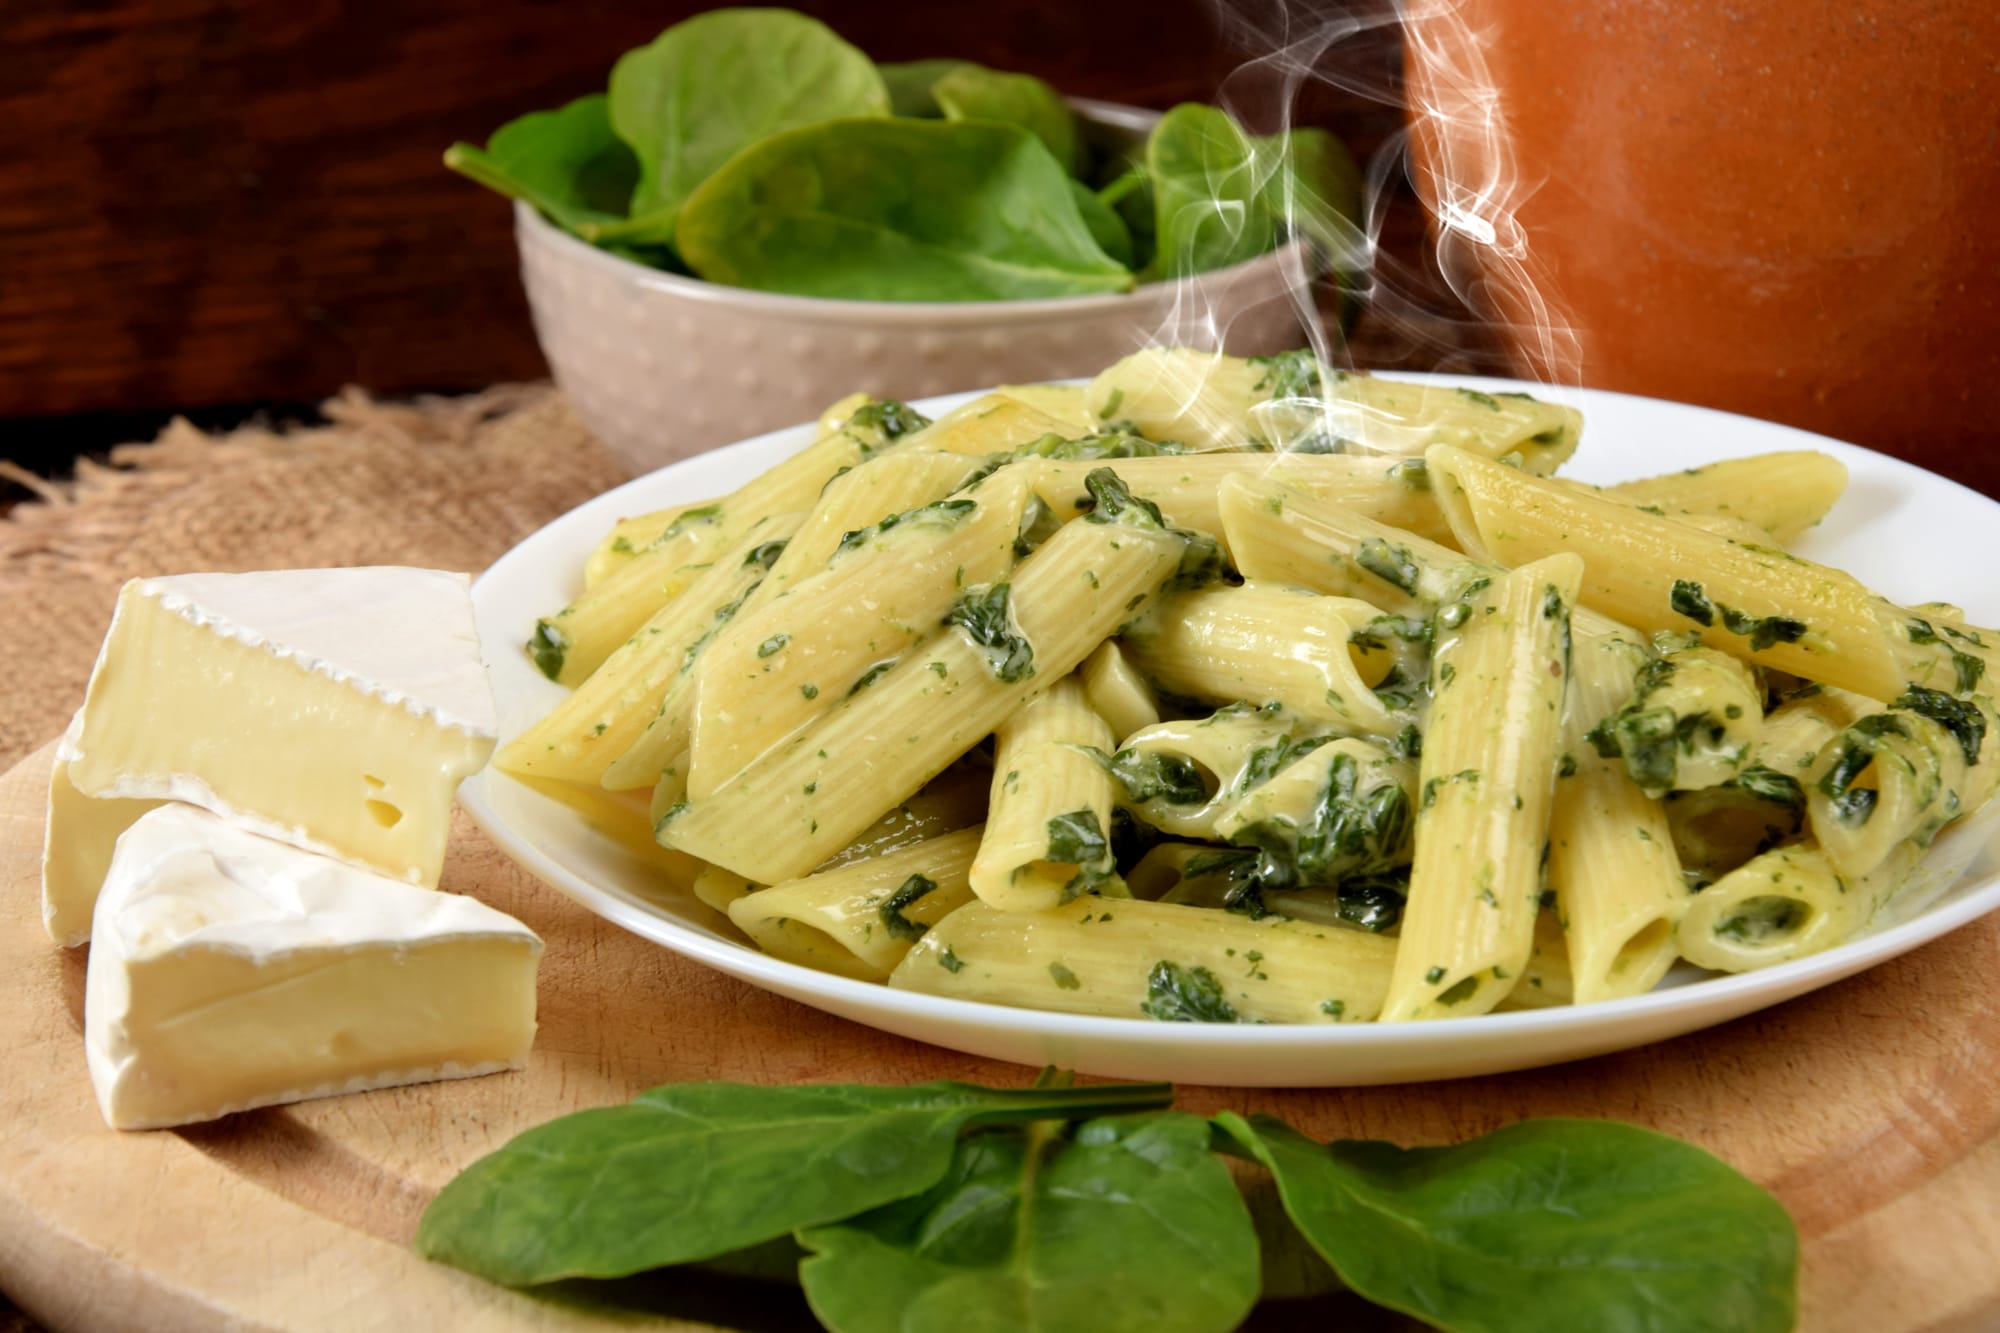 Spinach and Goat’s Cheese Penne